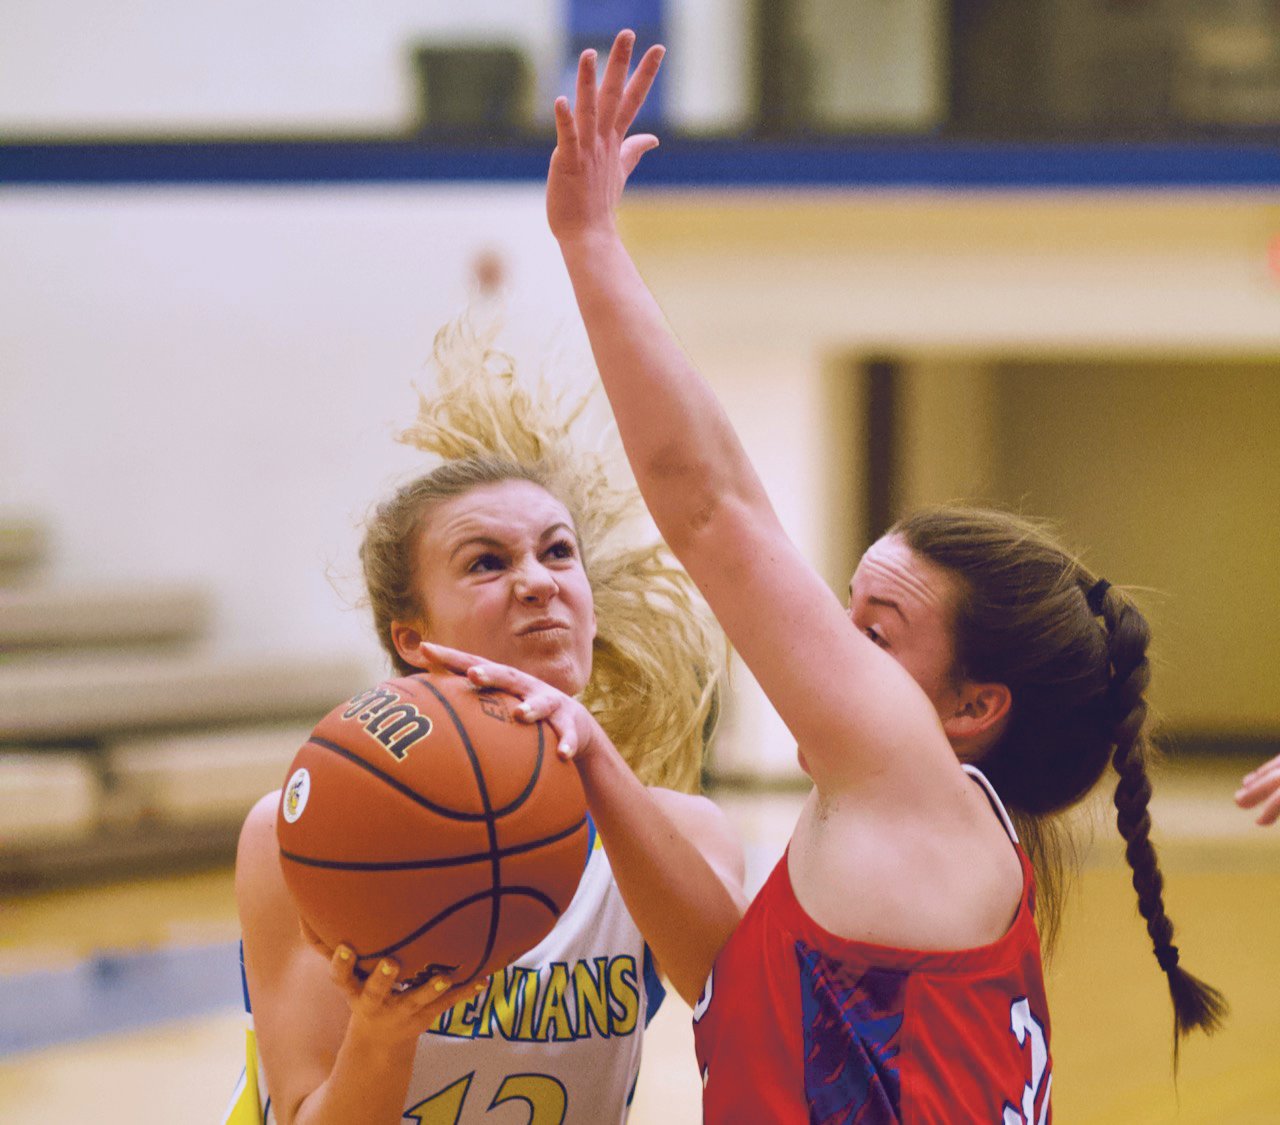 Crawfordsville's Lauren Kellerman scored 10 points in a Sagamore Conference loss to Western Boone on Tuesday.